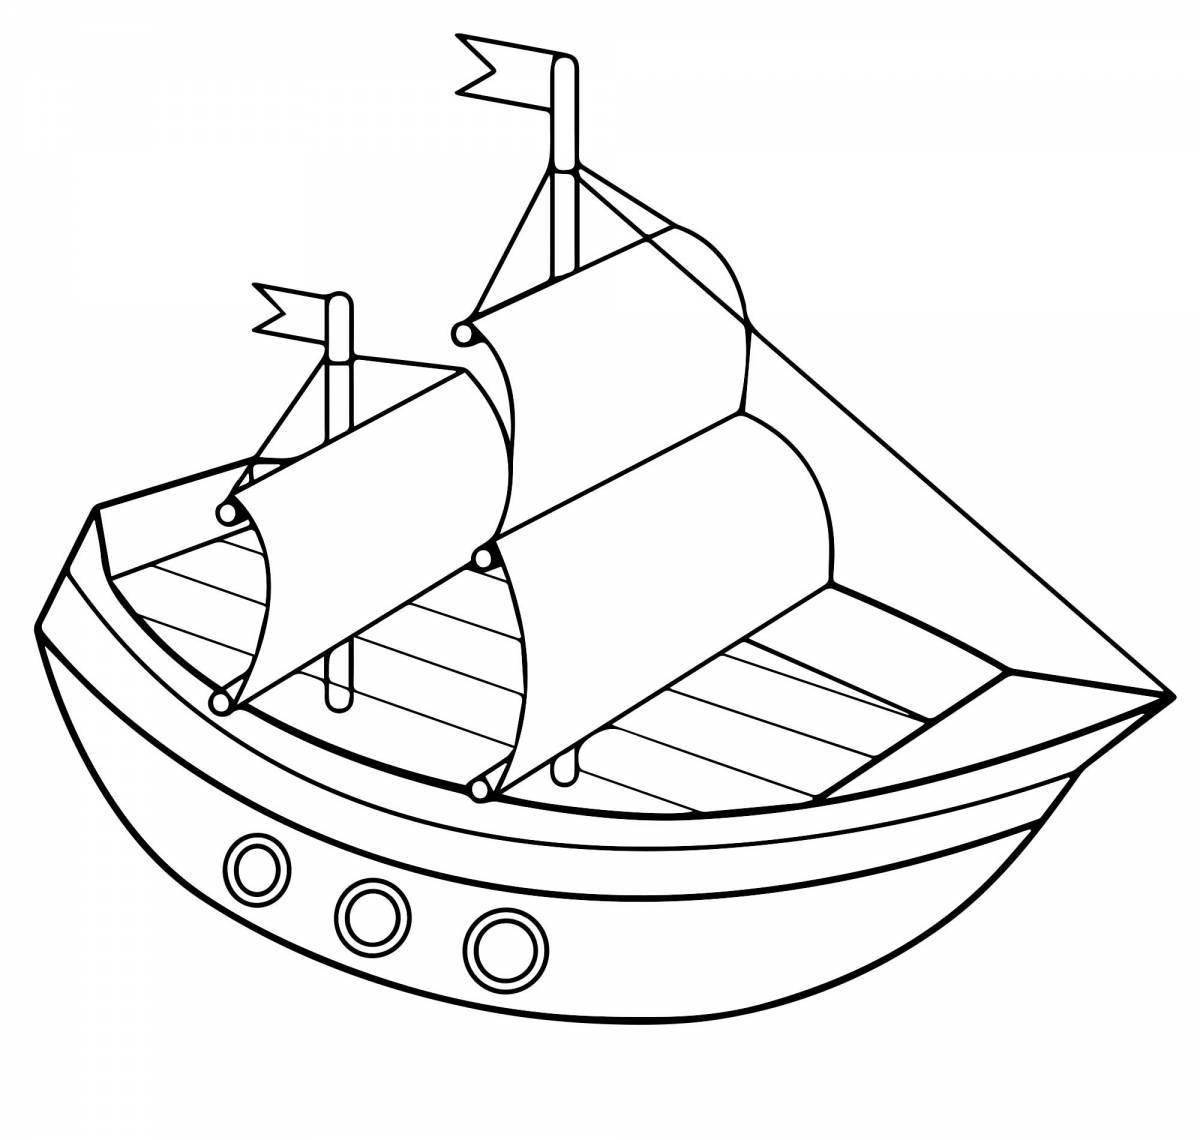 Fabulous boat coloring pages for kids